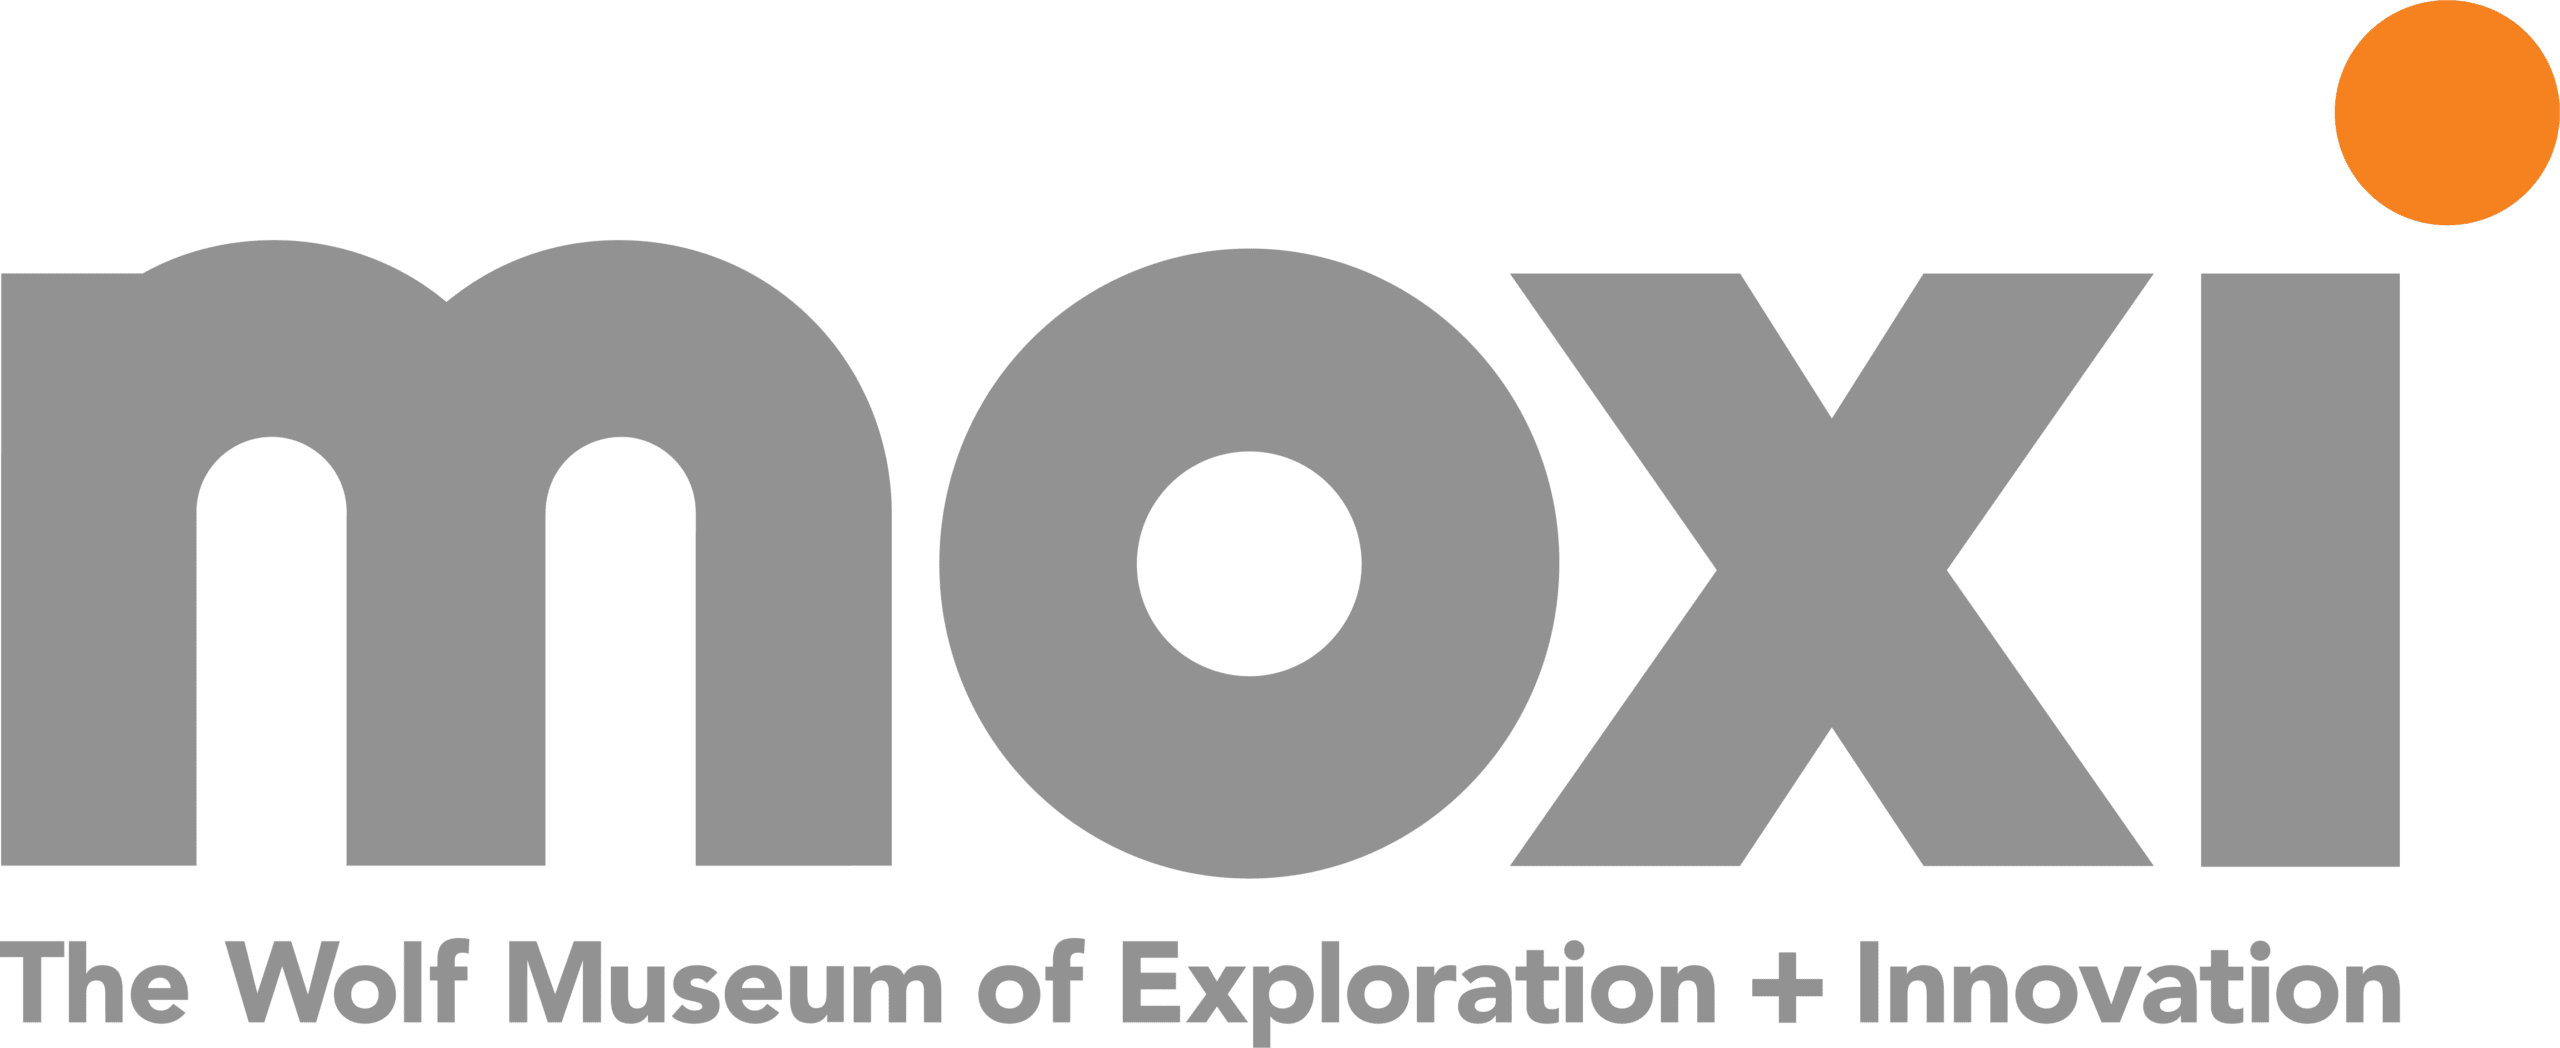 Visit - MOXI, The Wolf Museum of Exploration + Innovation